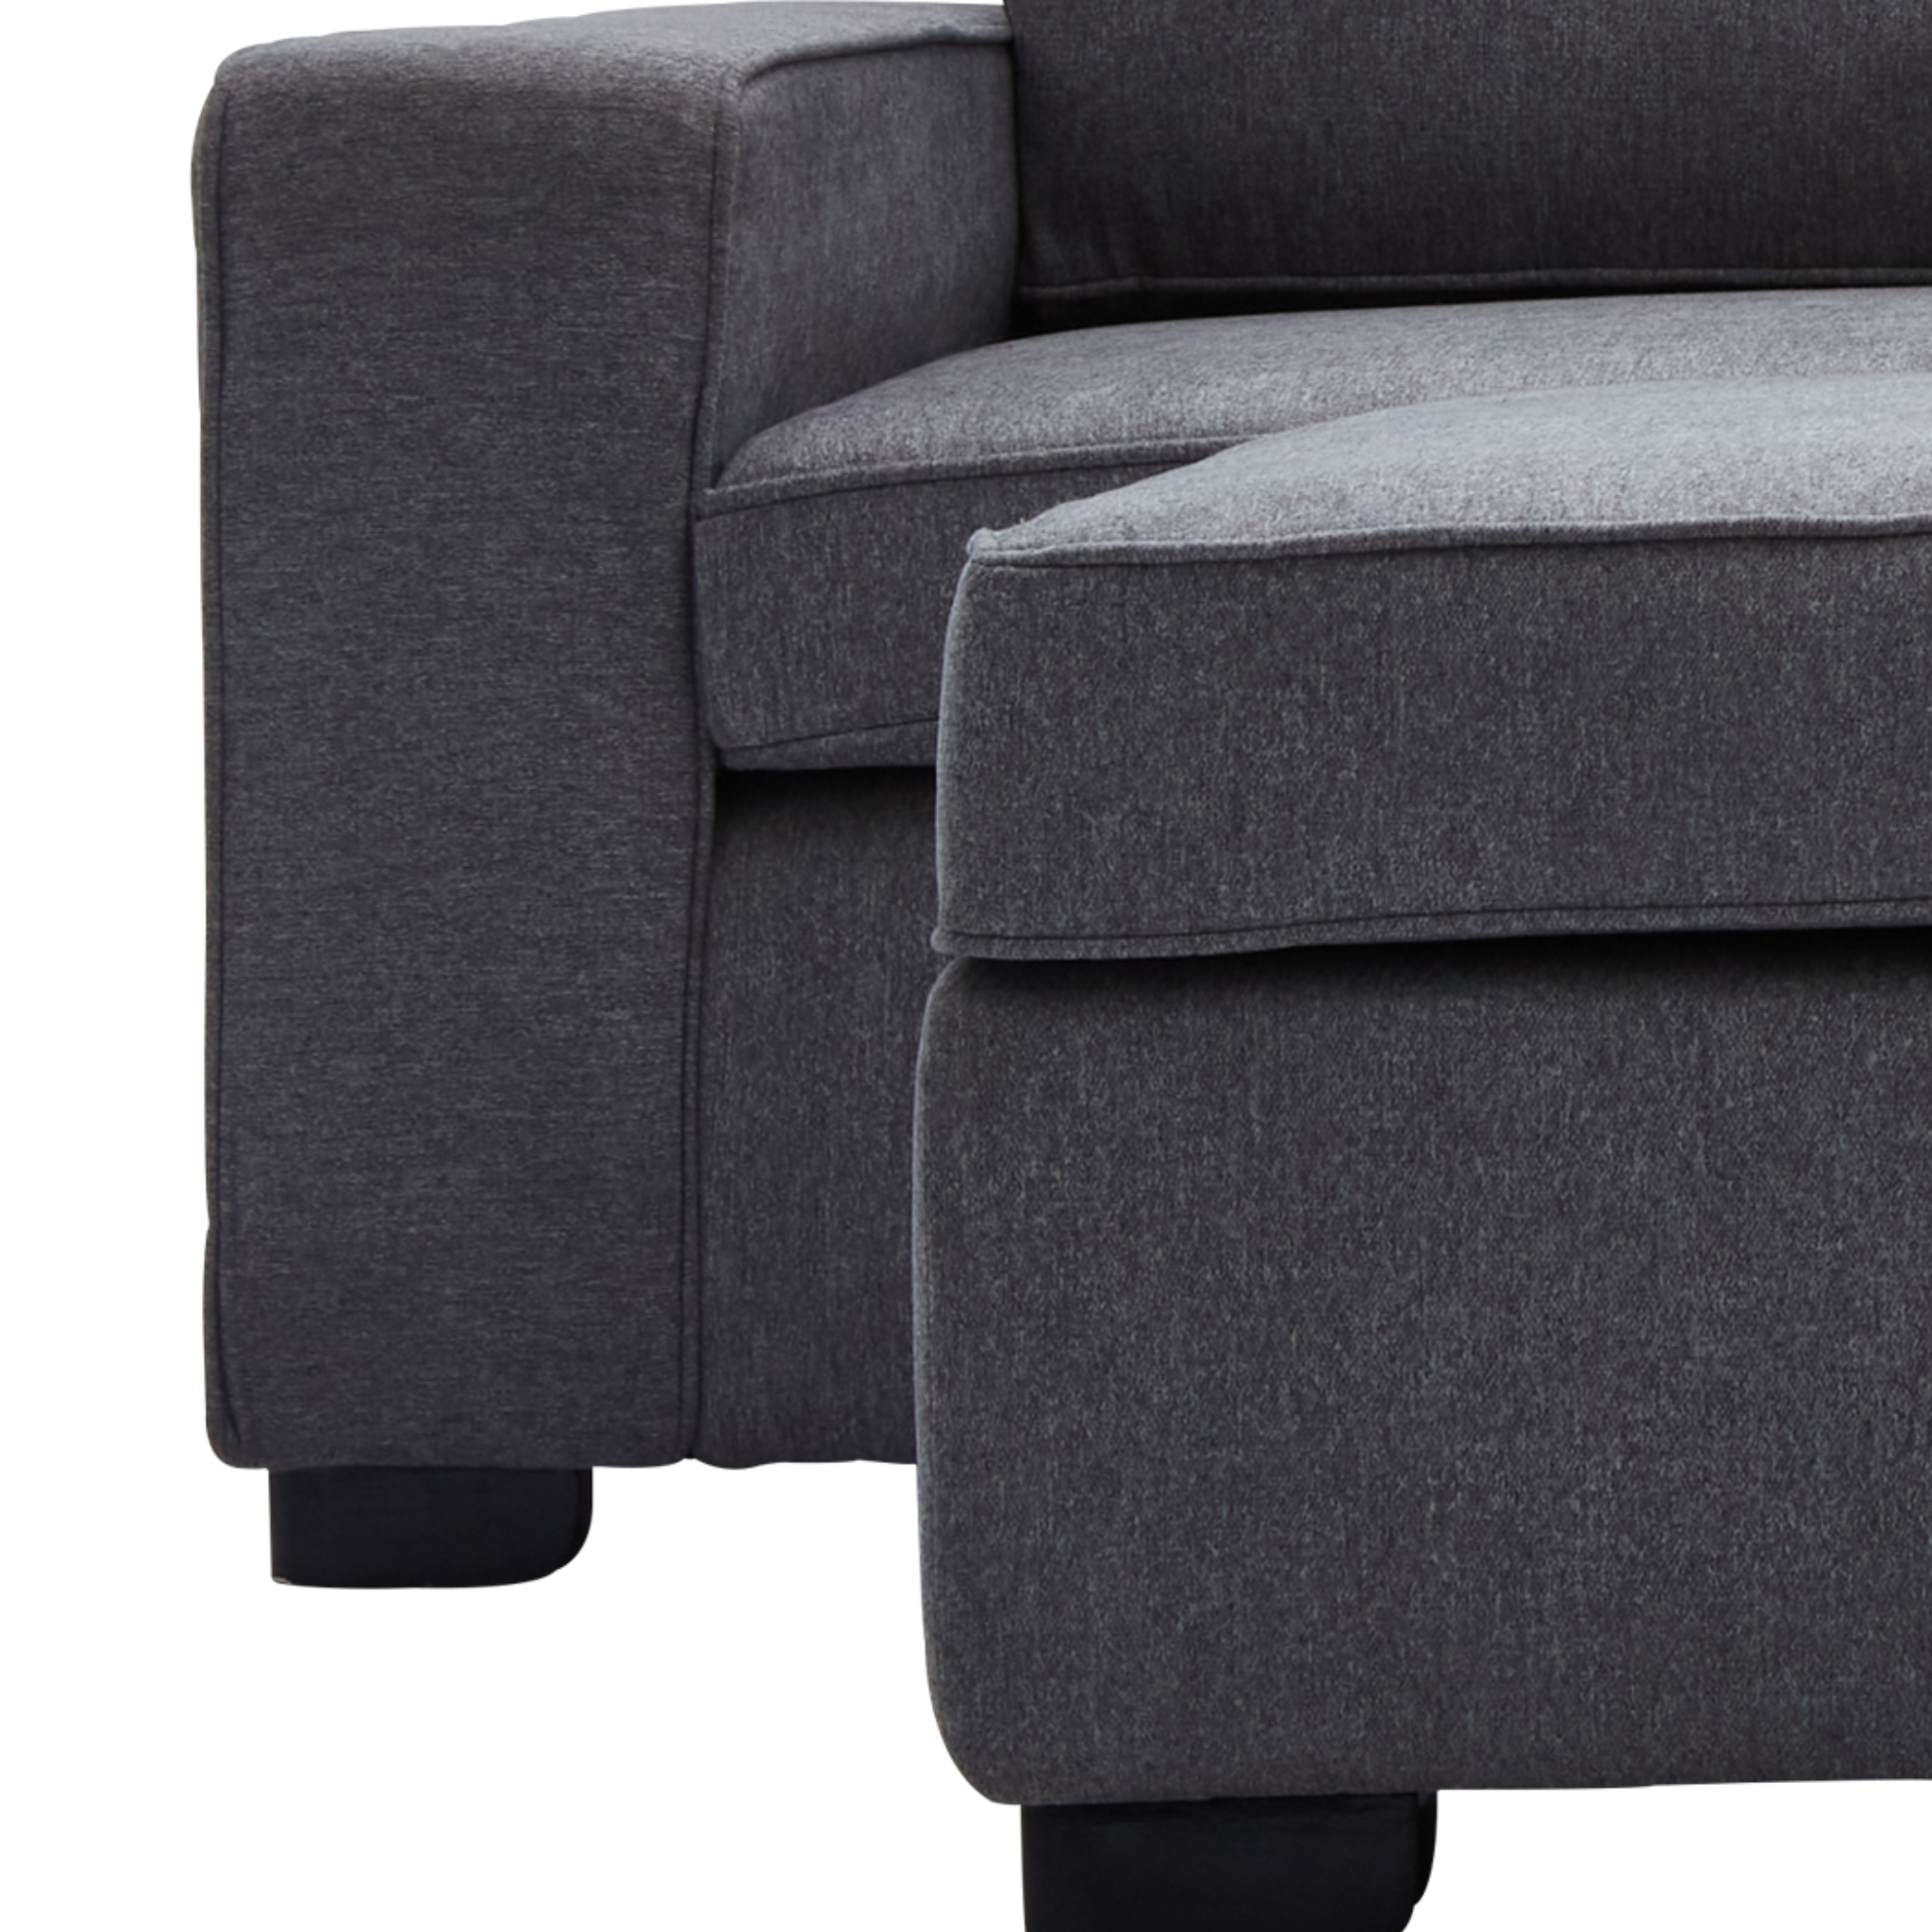 JENALD Fabric Sofa with Ottoman (Reversible L-Chaise) AF Home